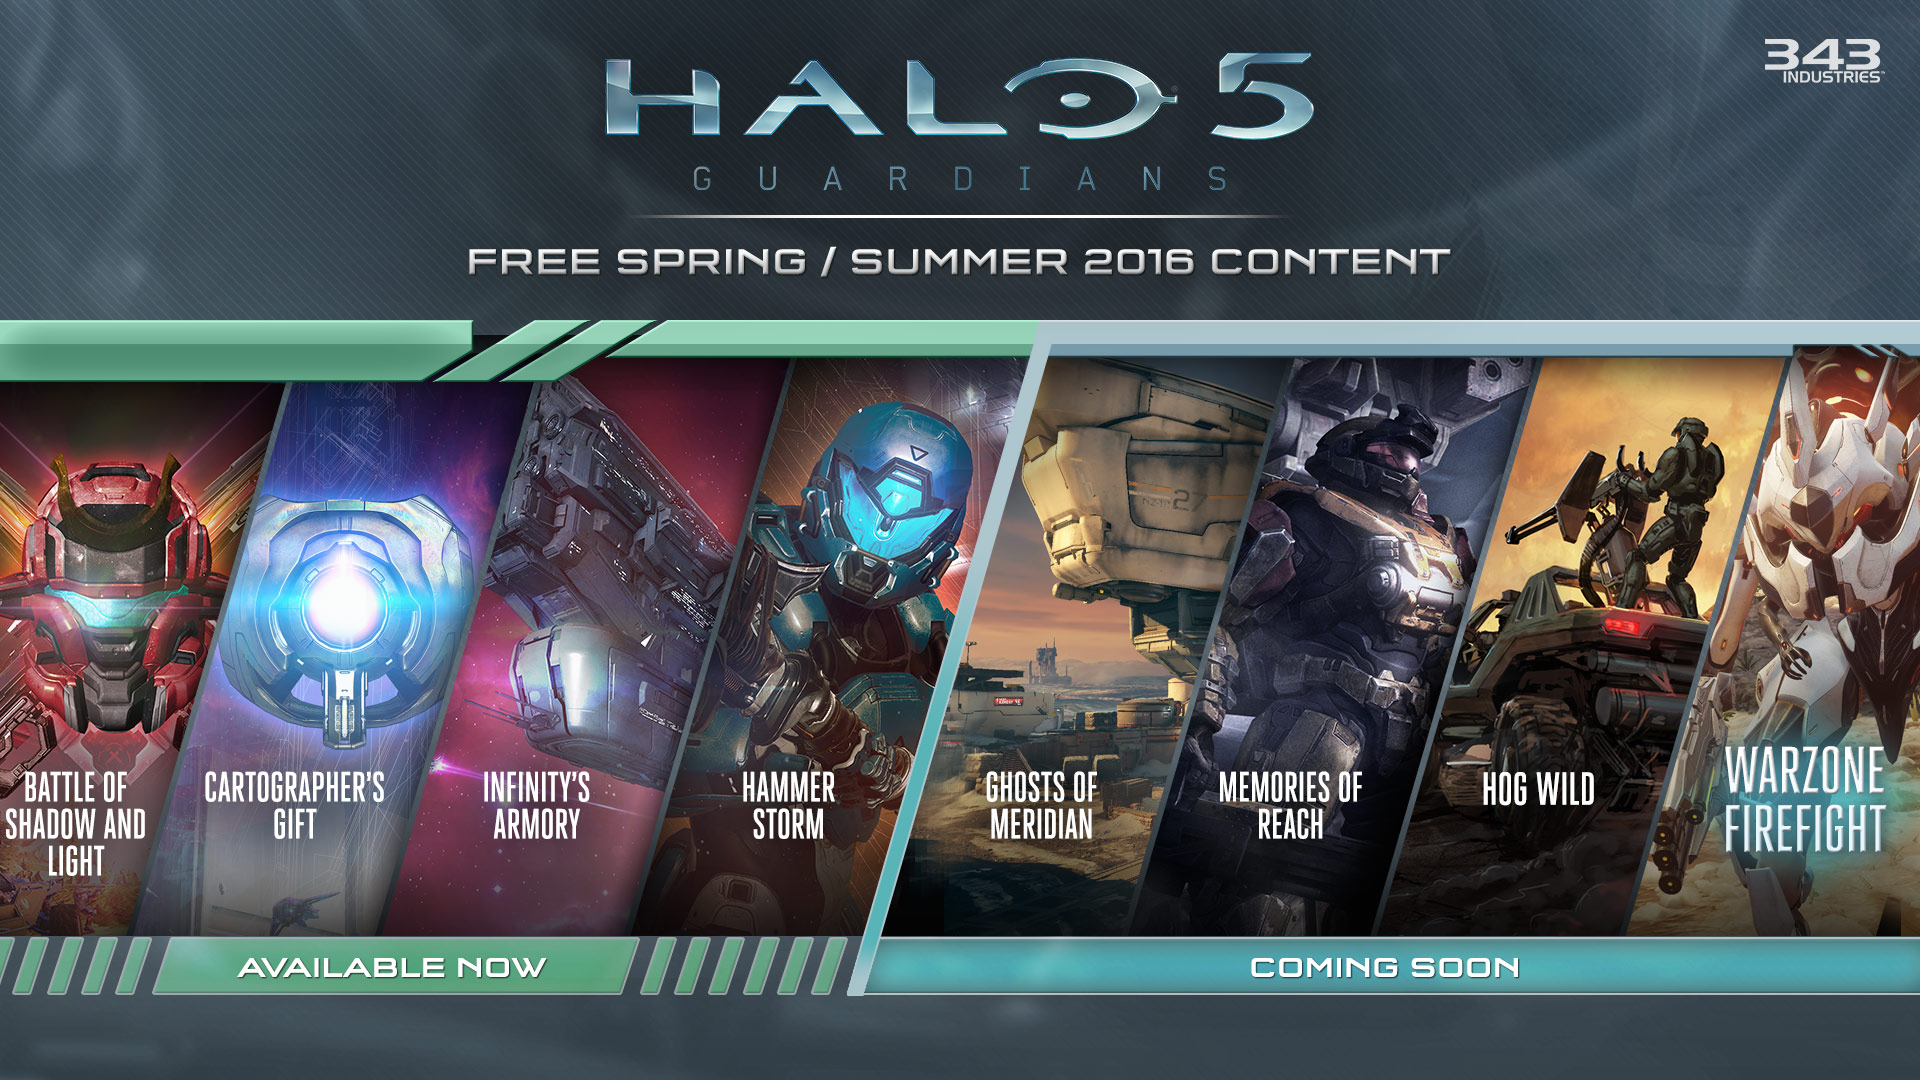 Halo 5 Guardians Free Spring and Summer Content Preview